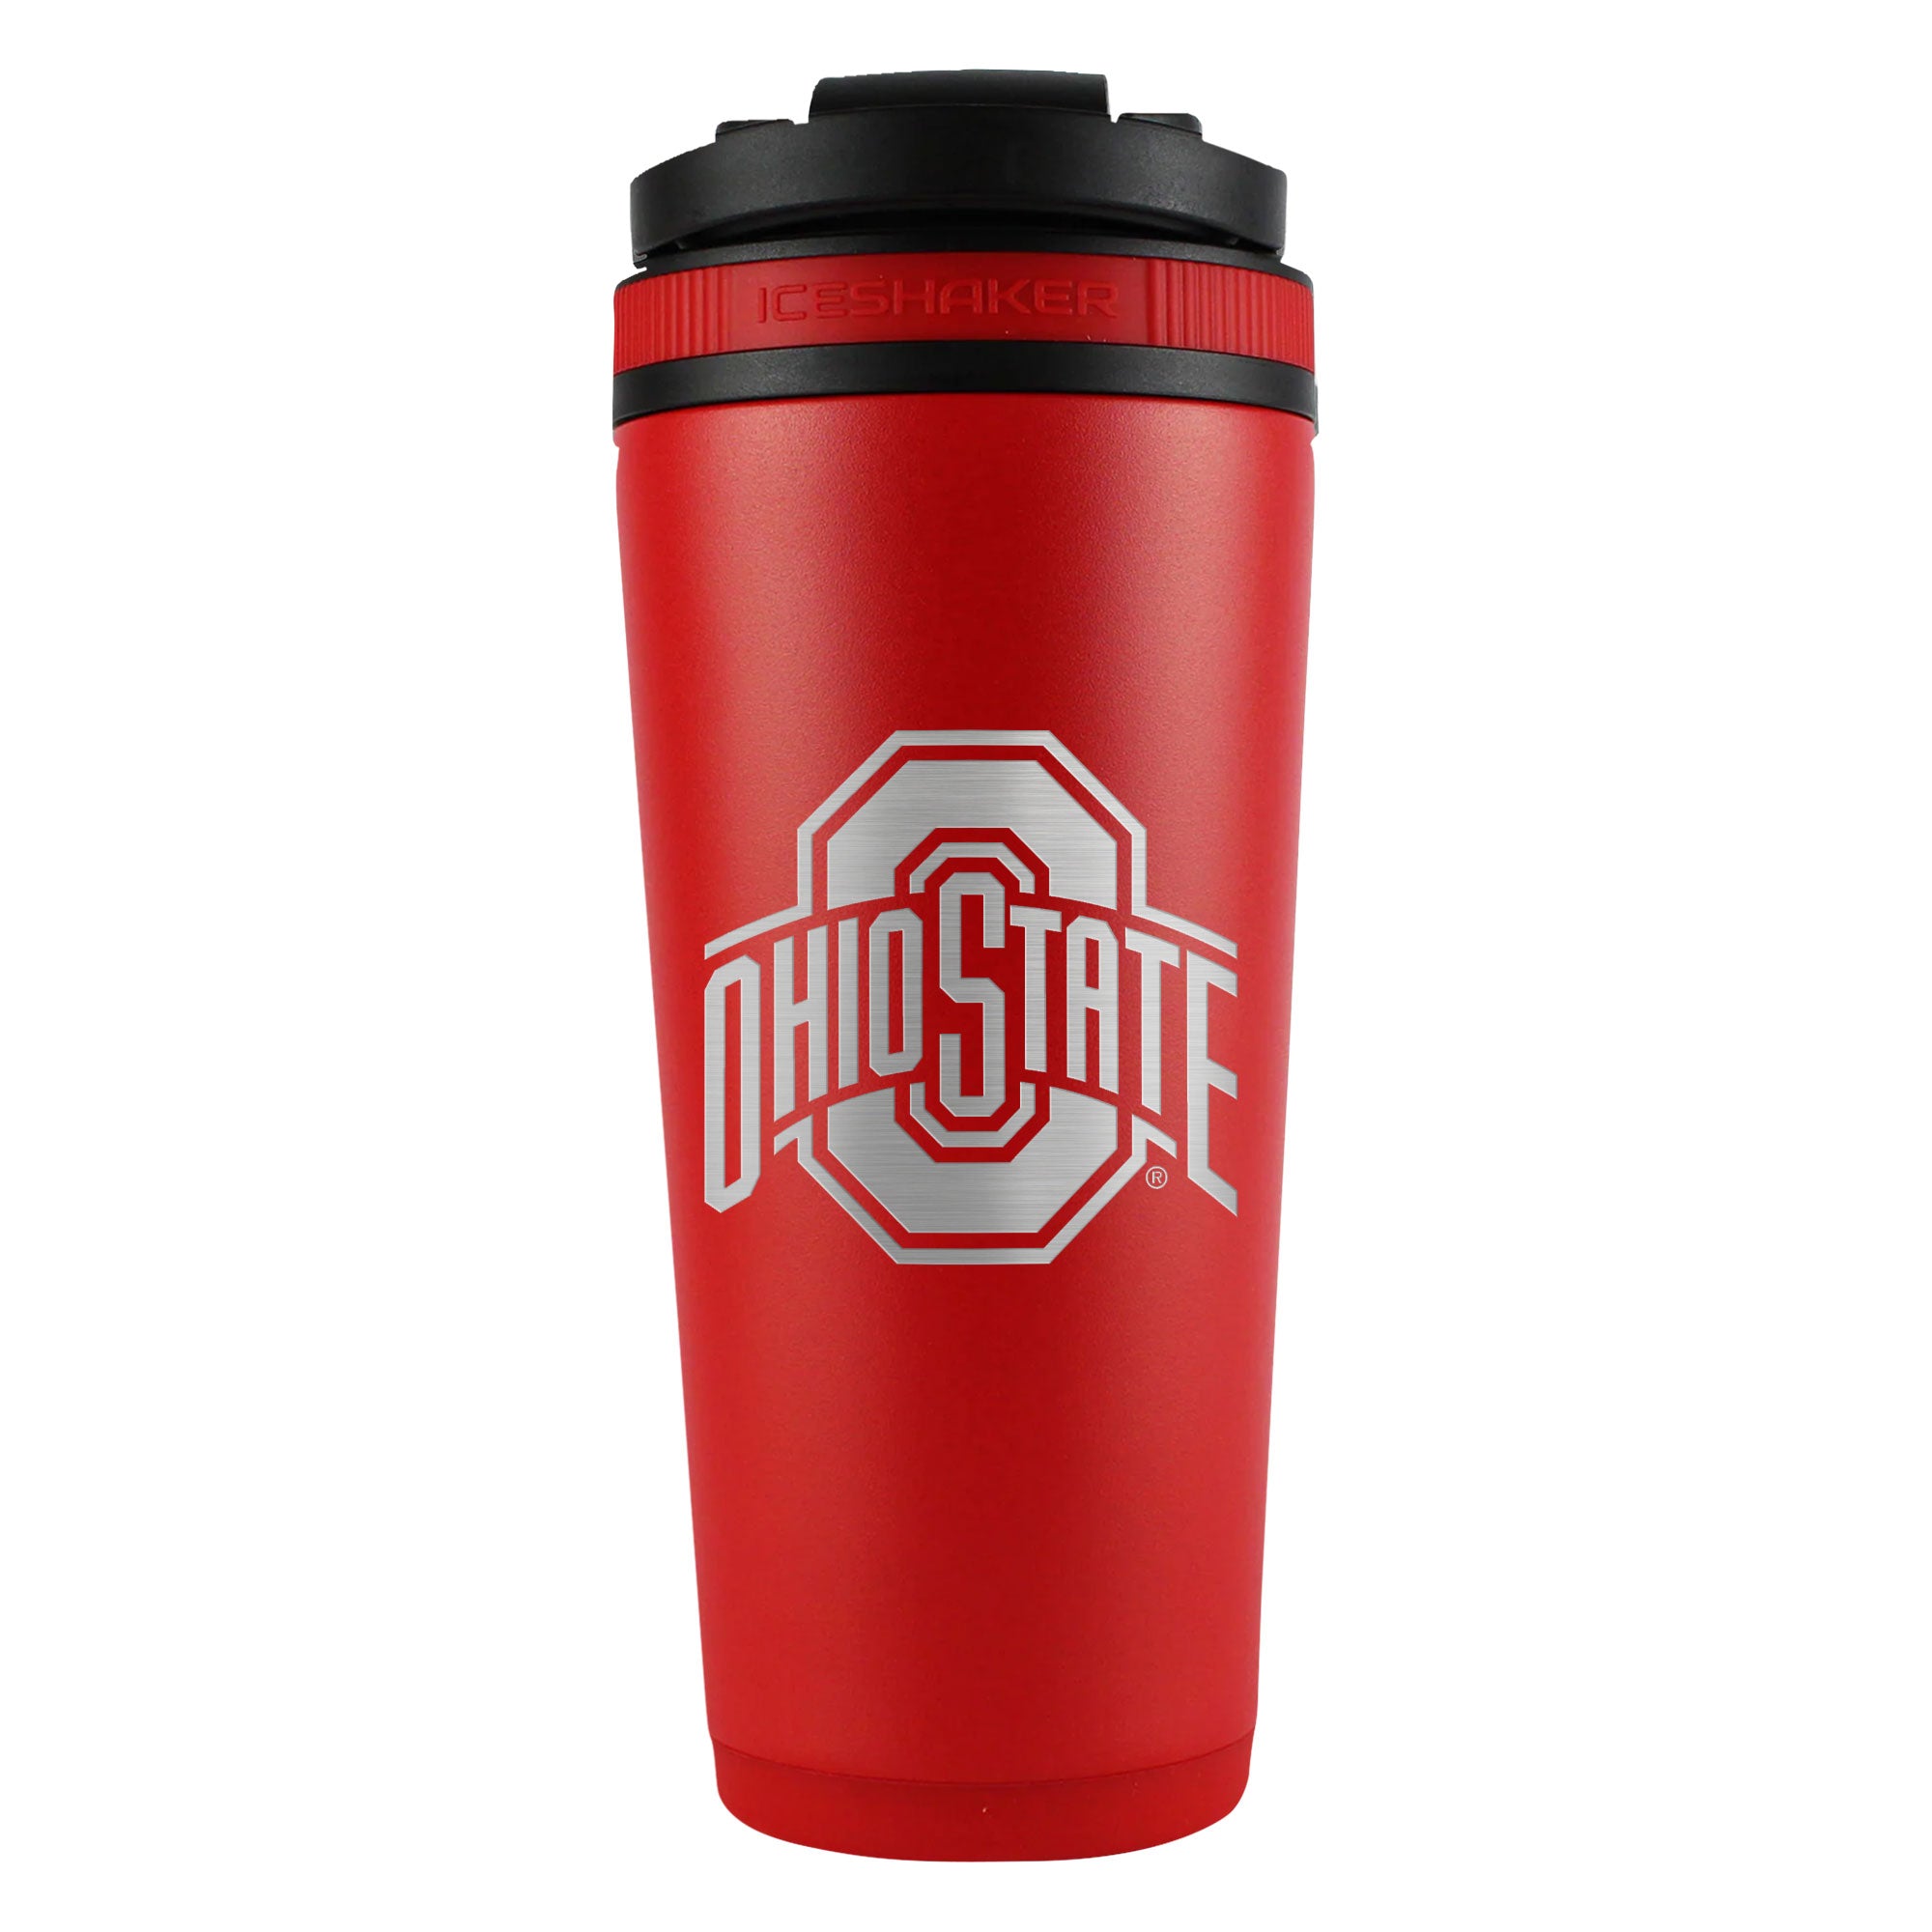 Officially Licensed Ohio State 26oz Ice Shaker